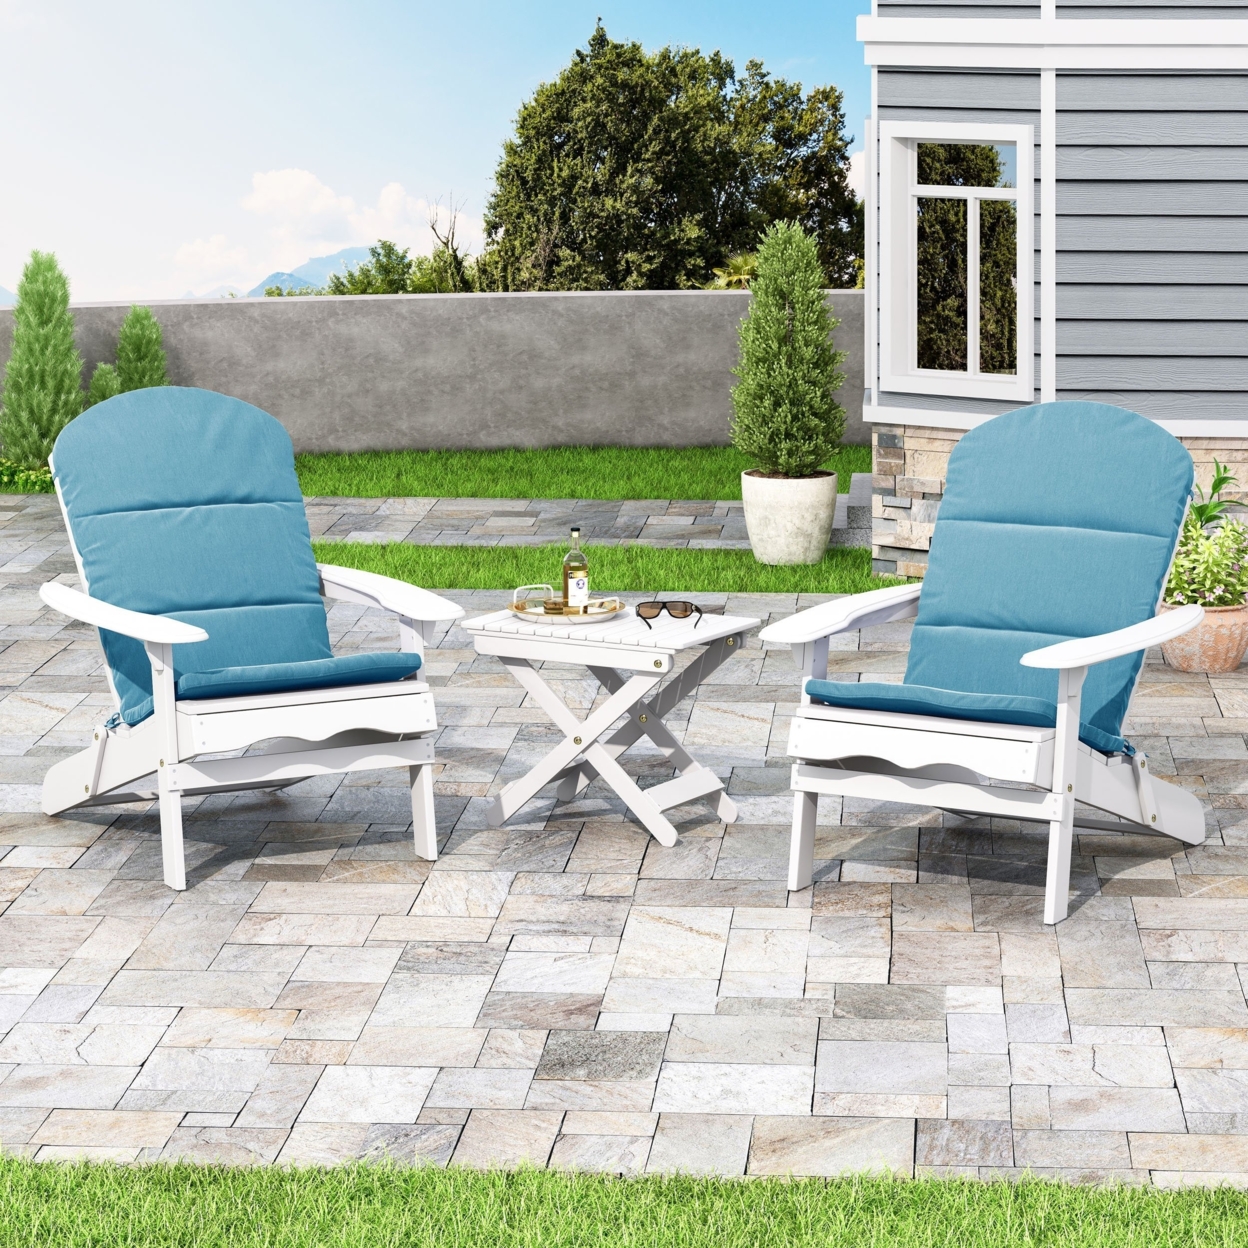 Reed Outdoor 2 Seater Acacia Wood Chat Set With Water Resistant Cushions - White/dark Teal